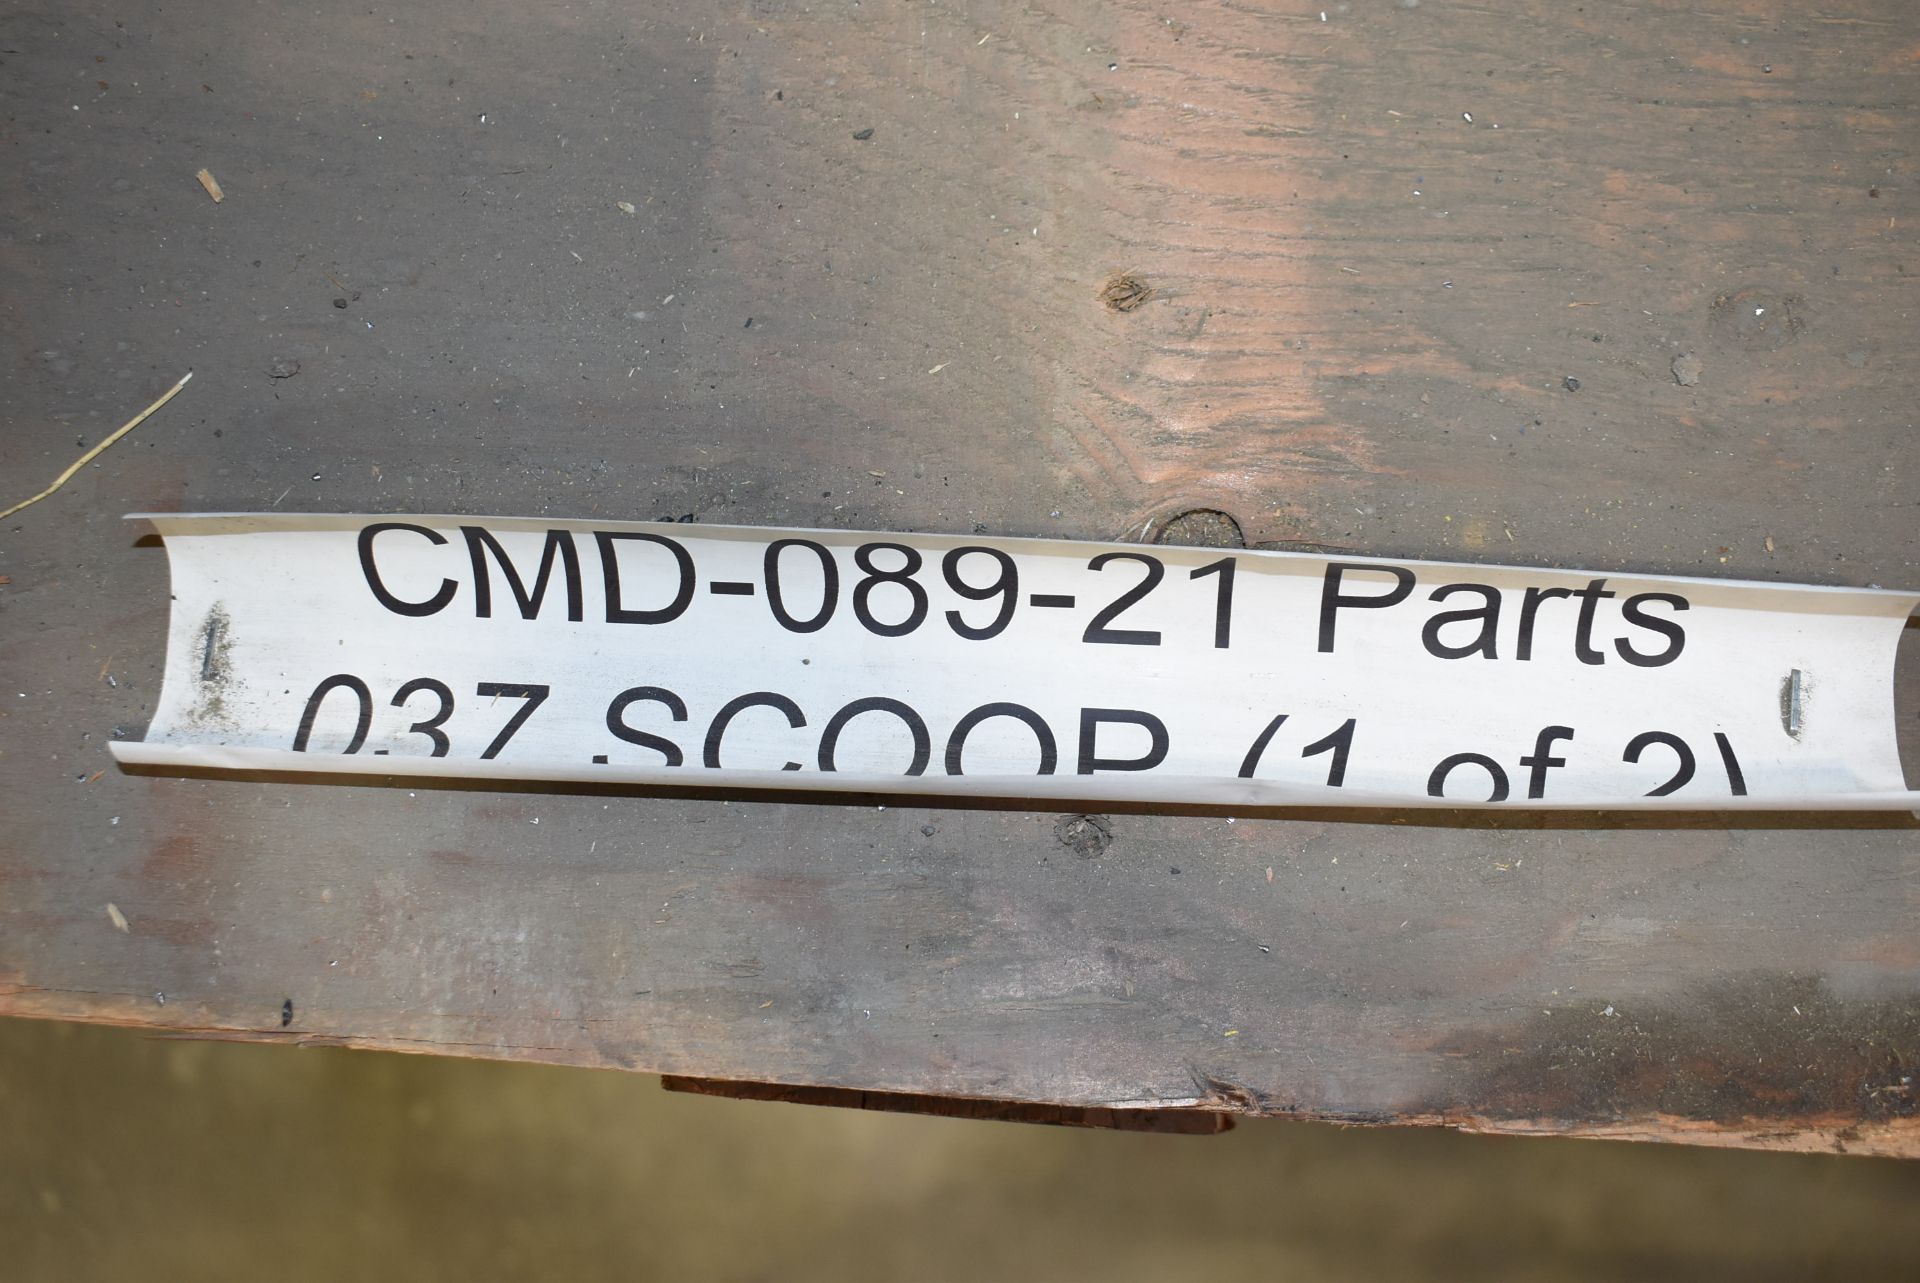 LOT/ CONTENTS OF PALLET CONSISTING OF SPARE PARTS FOR ATLAS COPCO ST14 SCOOP LOADER (CMD-089-21) - Bild 4 aus 4